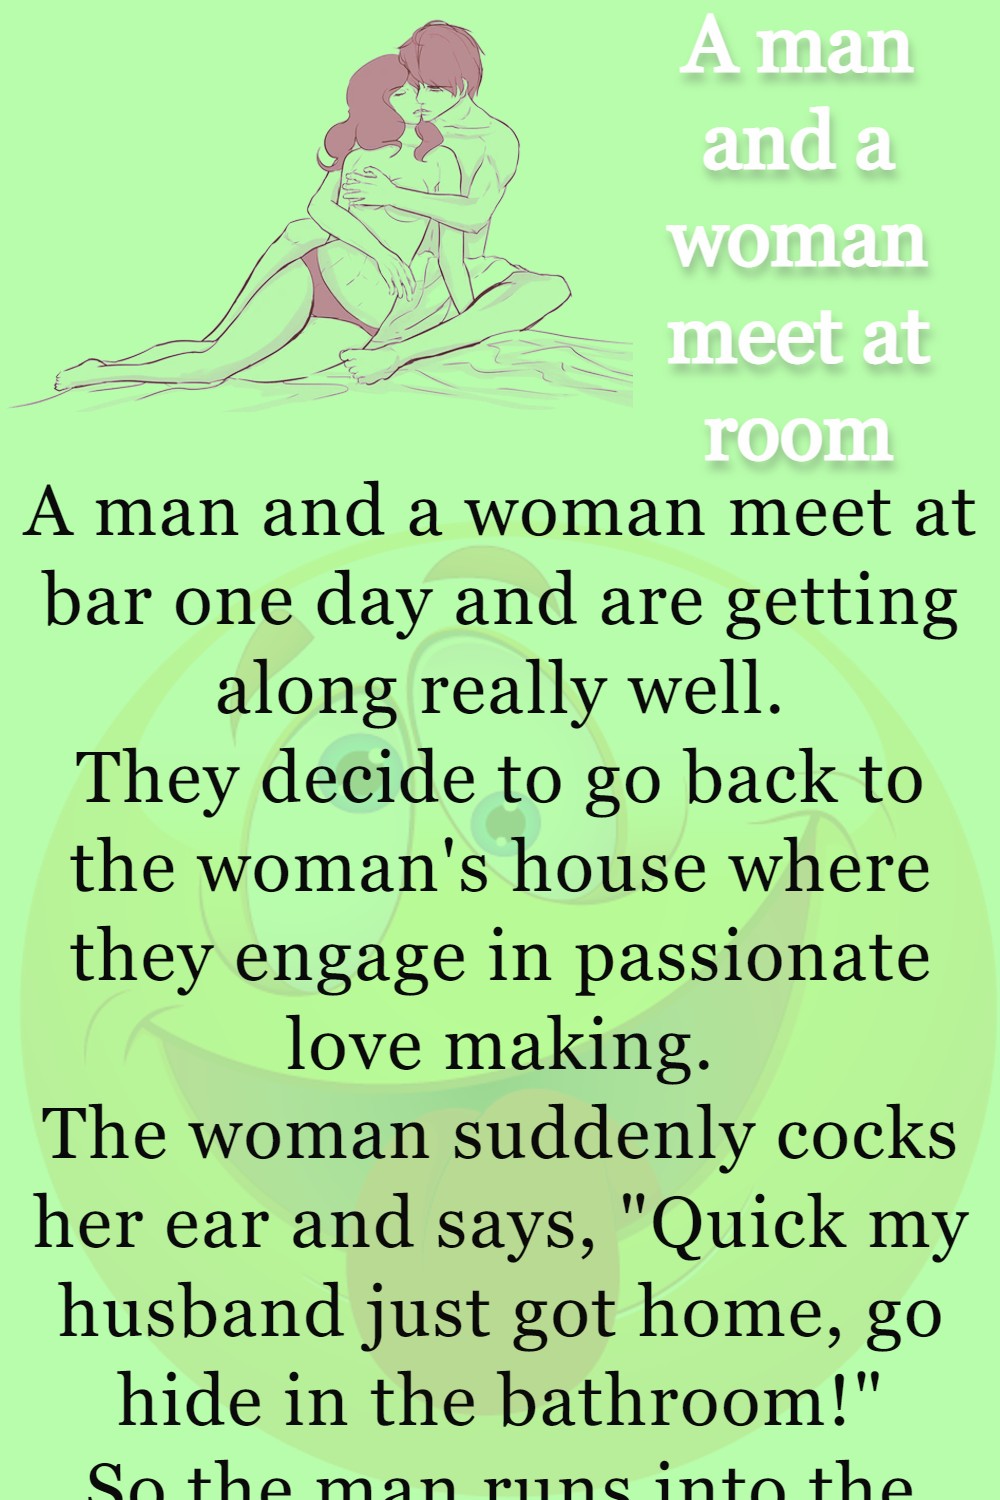 A man and a woman meet at room - Funny Story